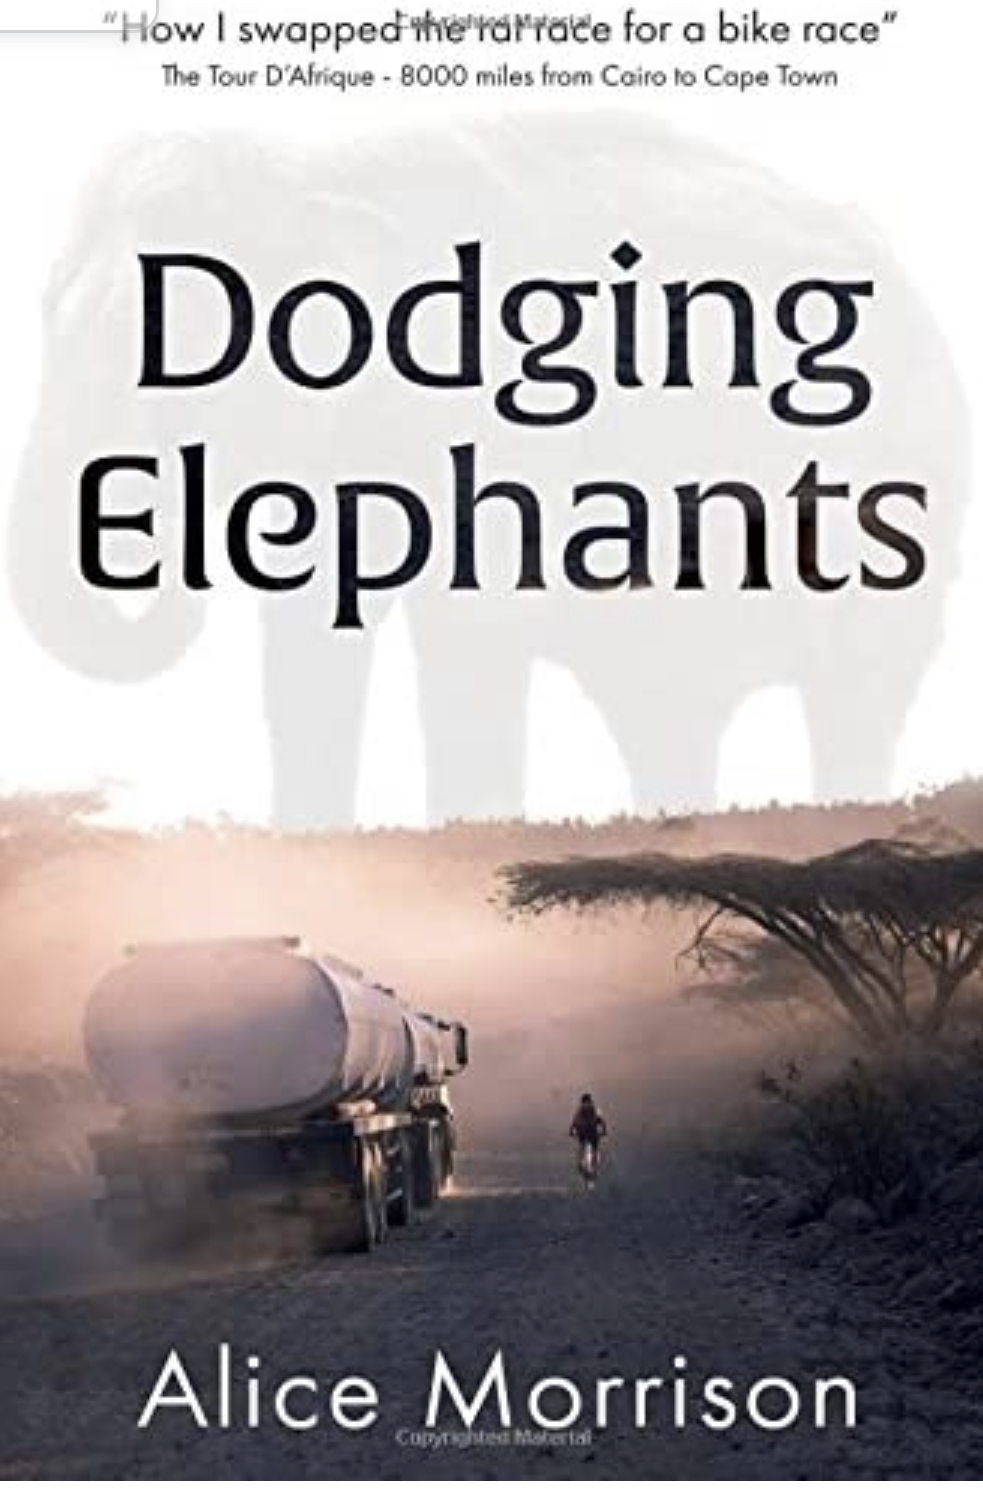 Cycling from Cairo to Cape Town Tour d'Afrique Alice Morrison Book Dodging Elephants